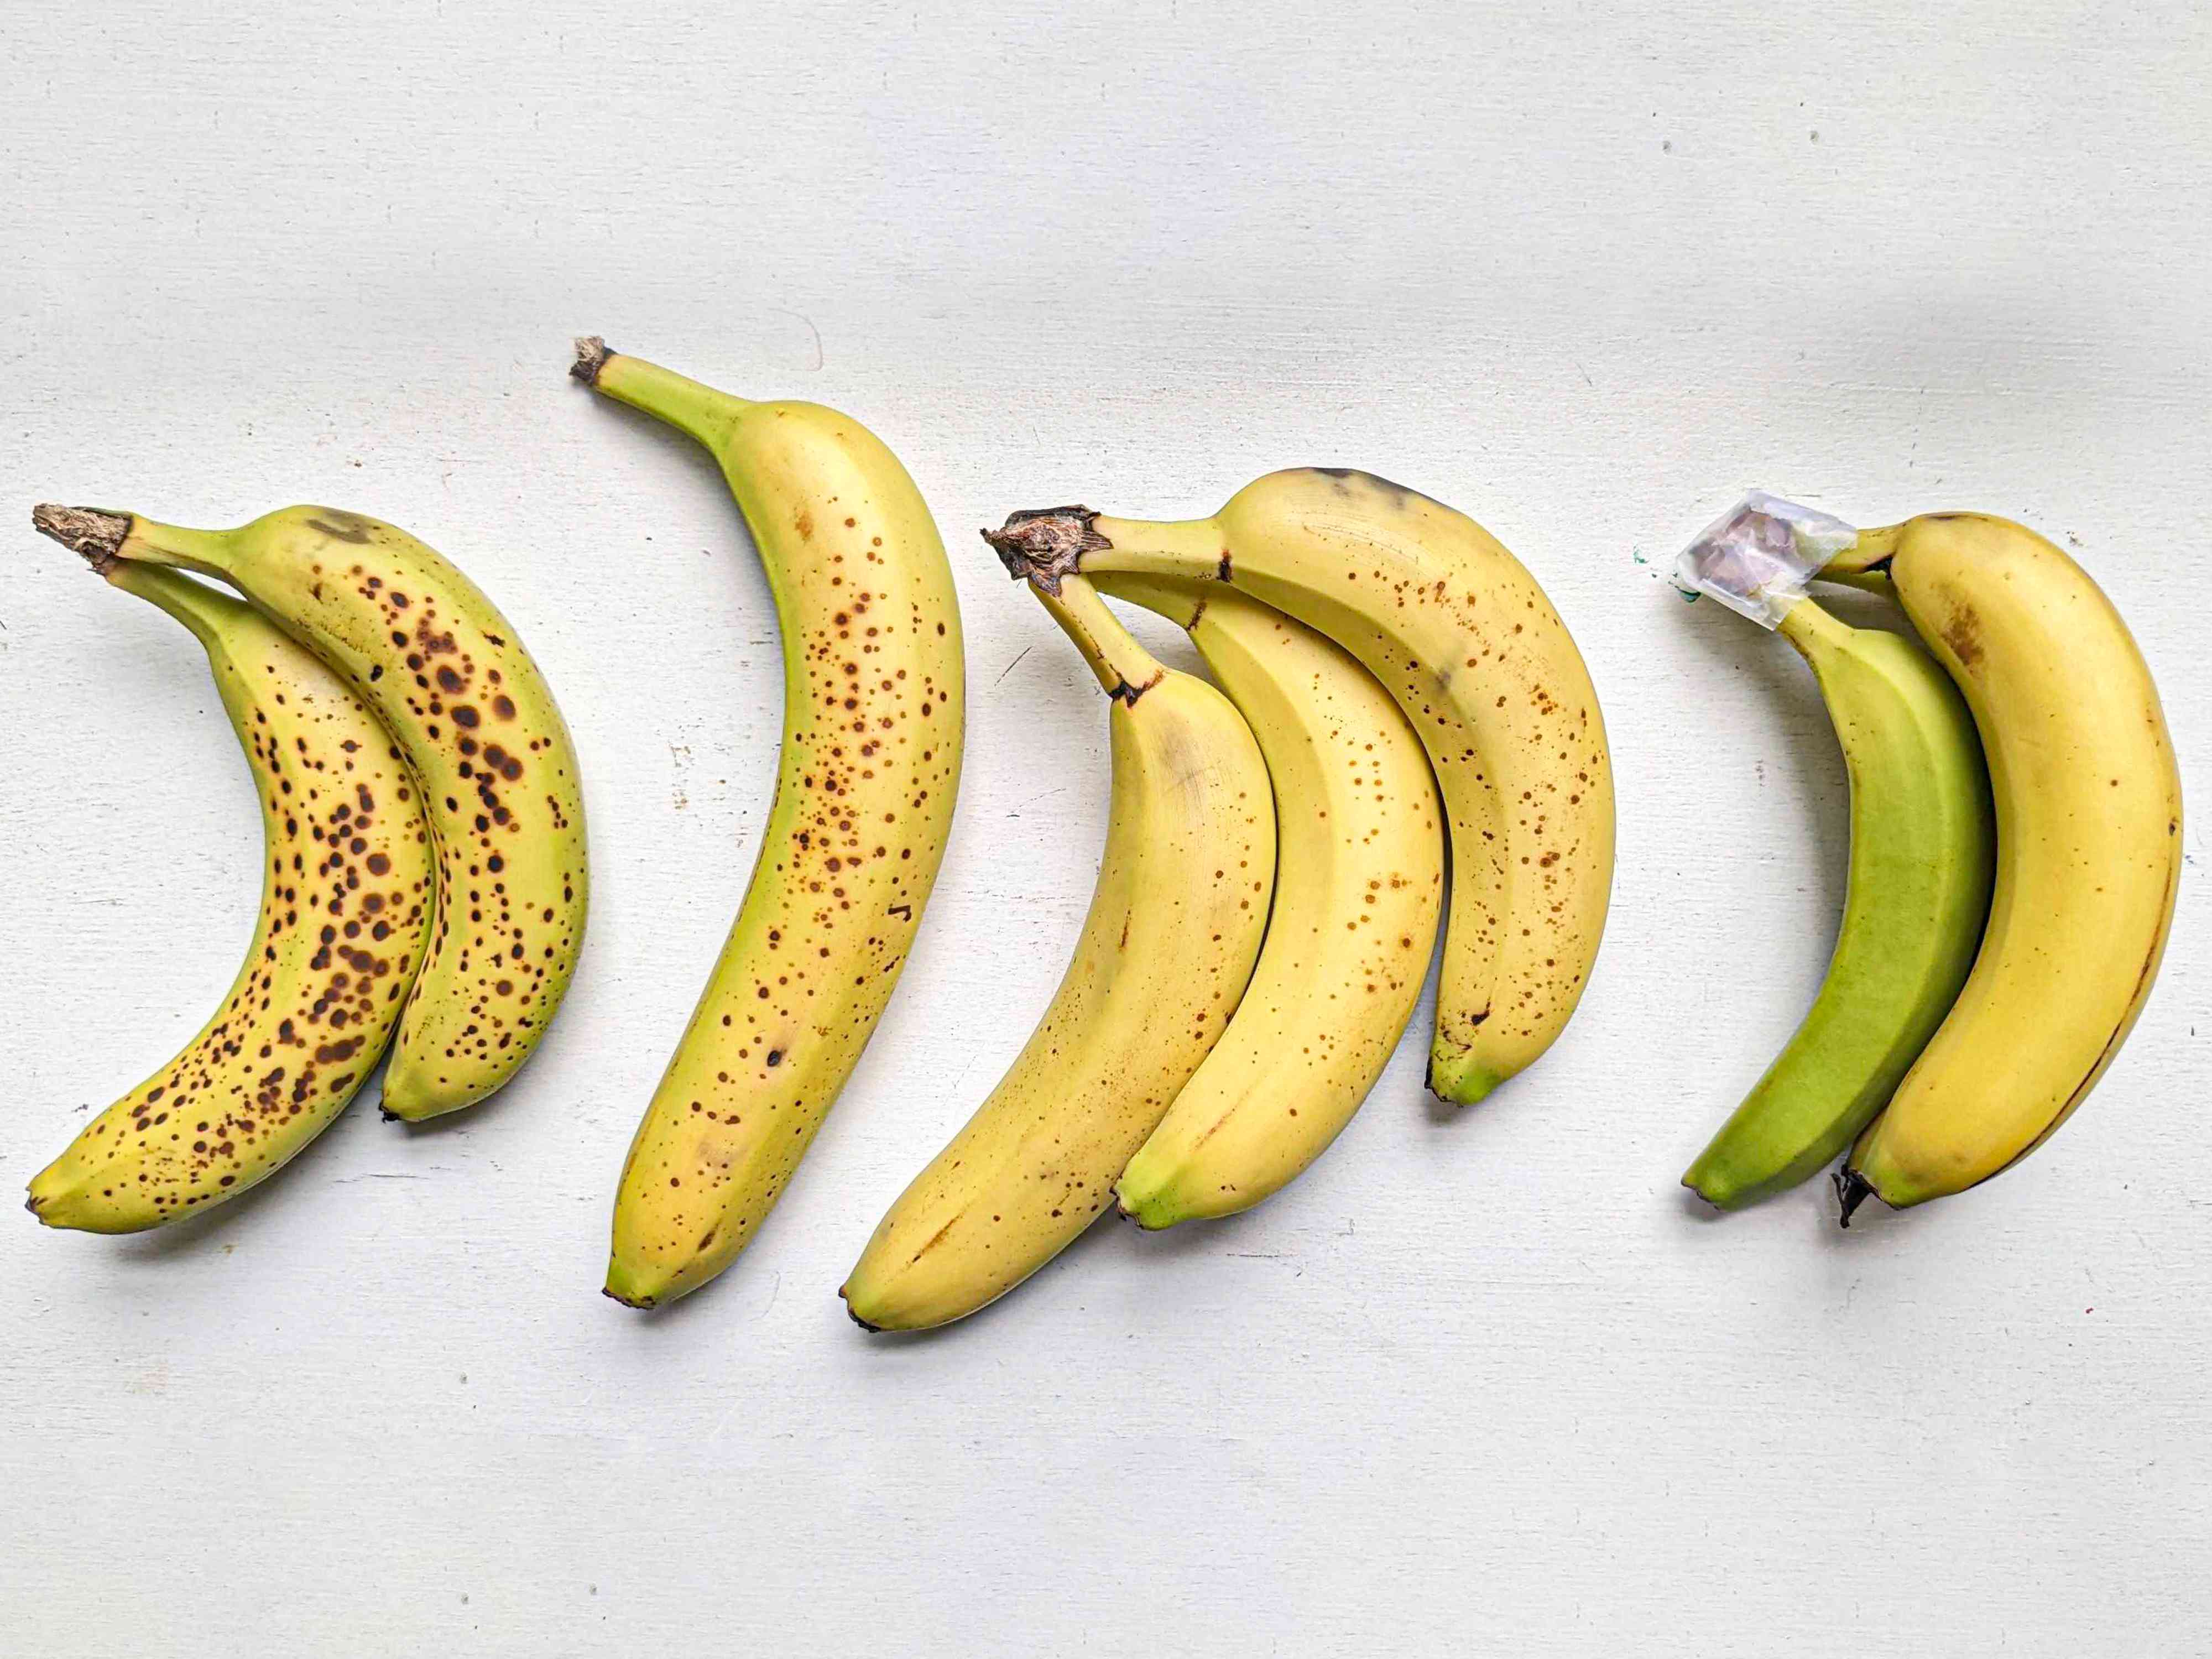 How to Ripen and Store Bananas